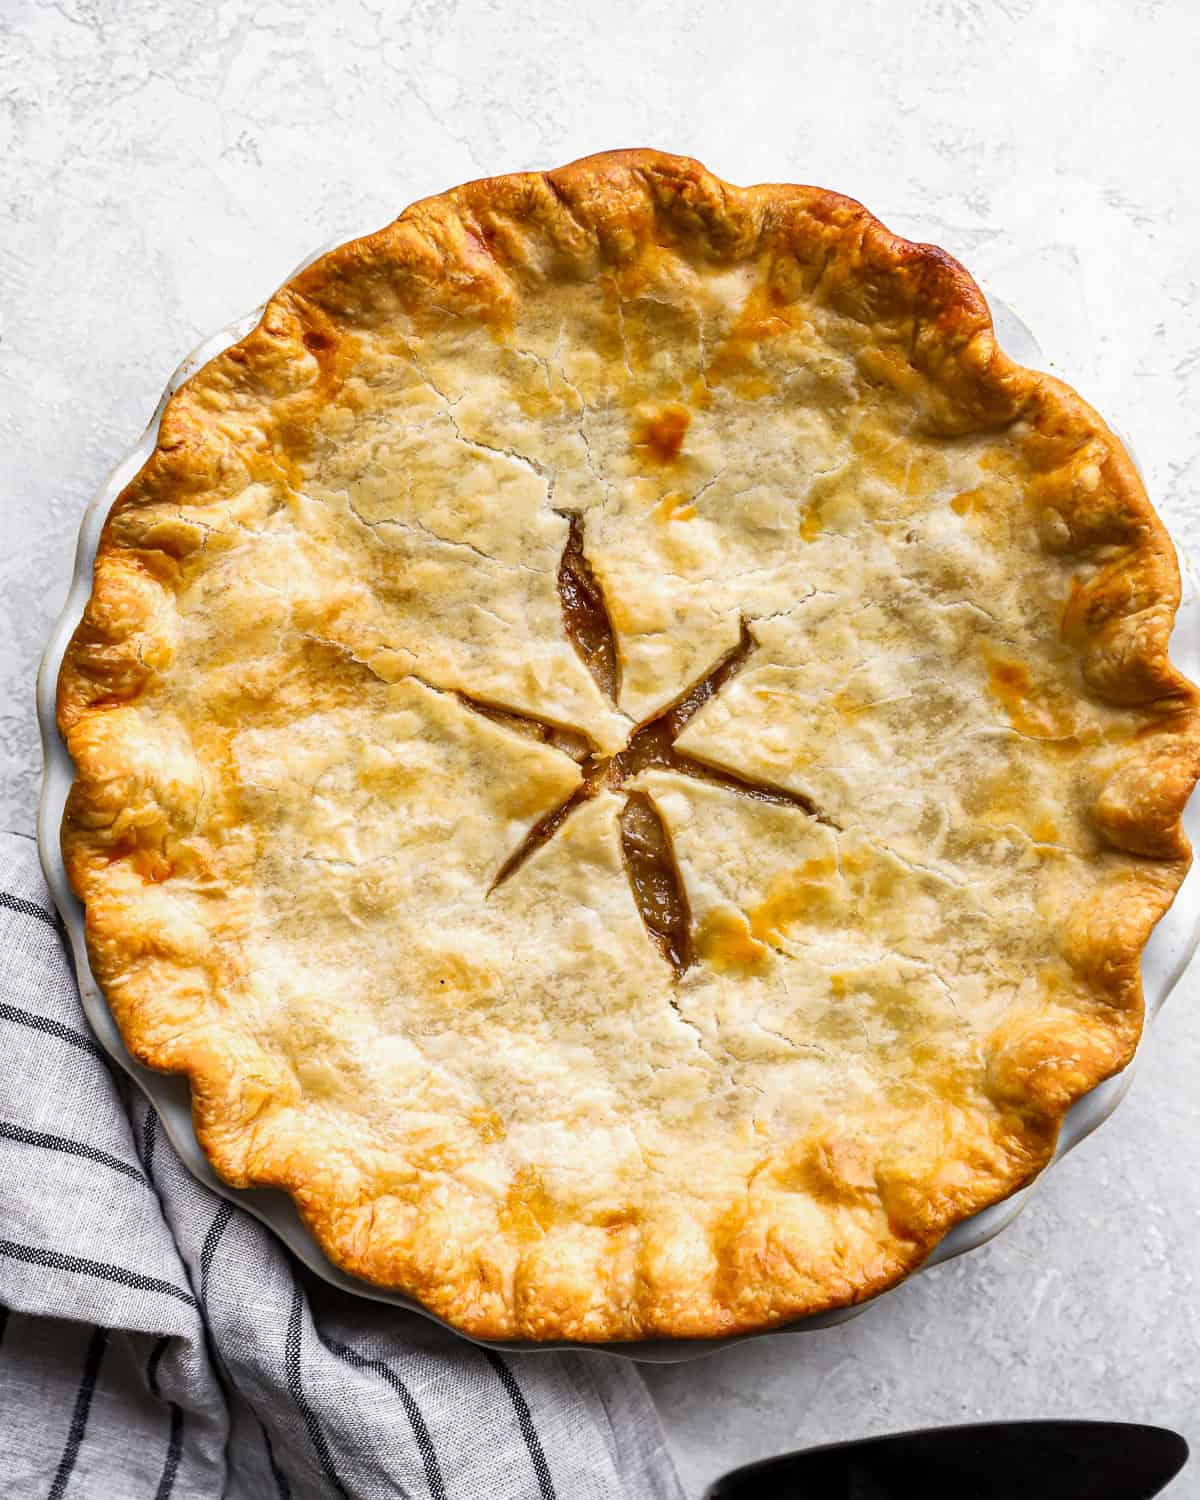 A homemade pie on a plate with a knife and fork.